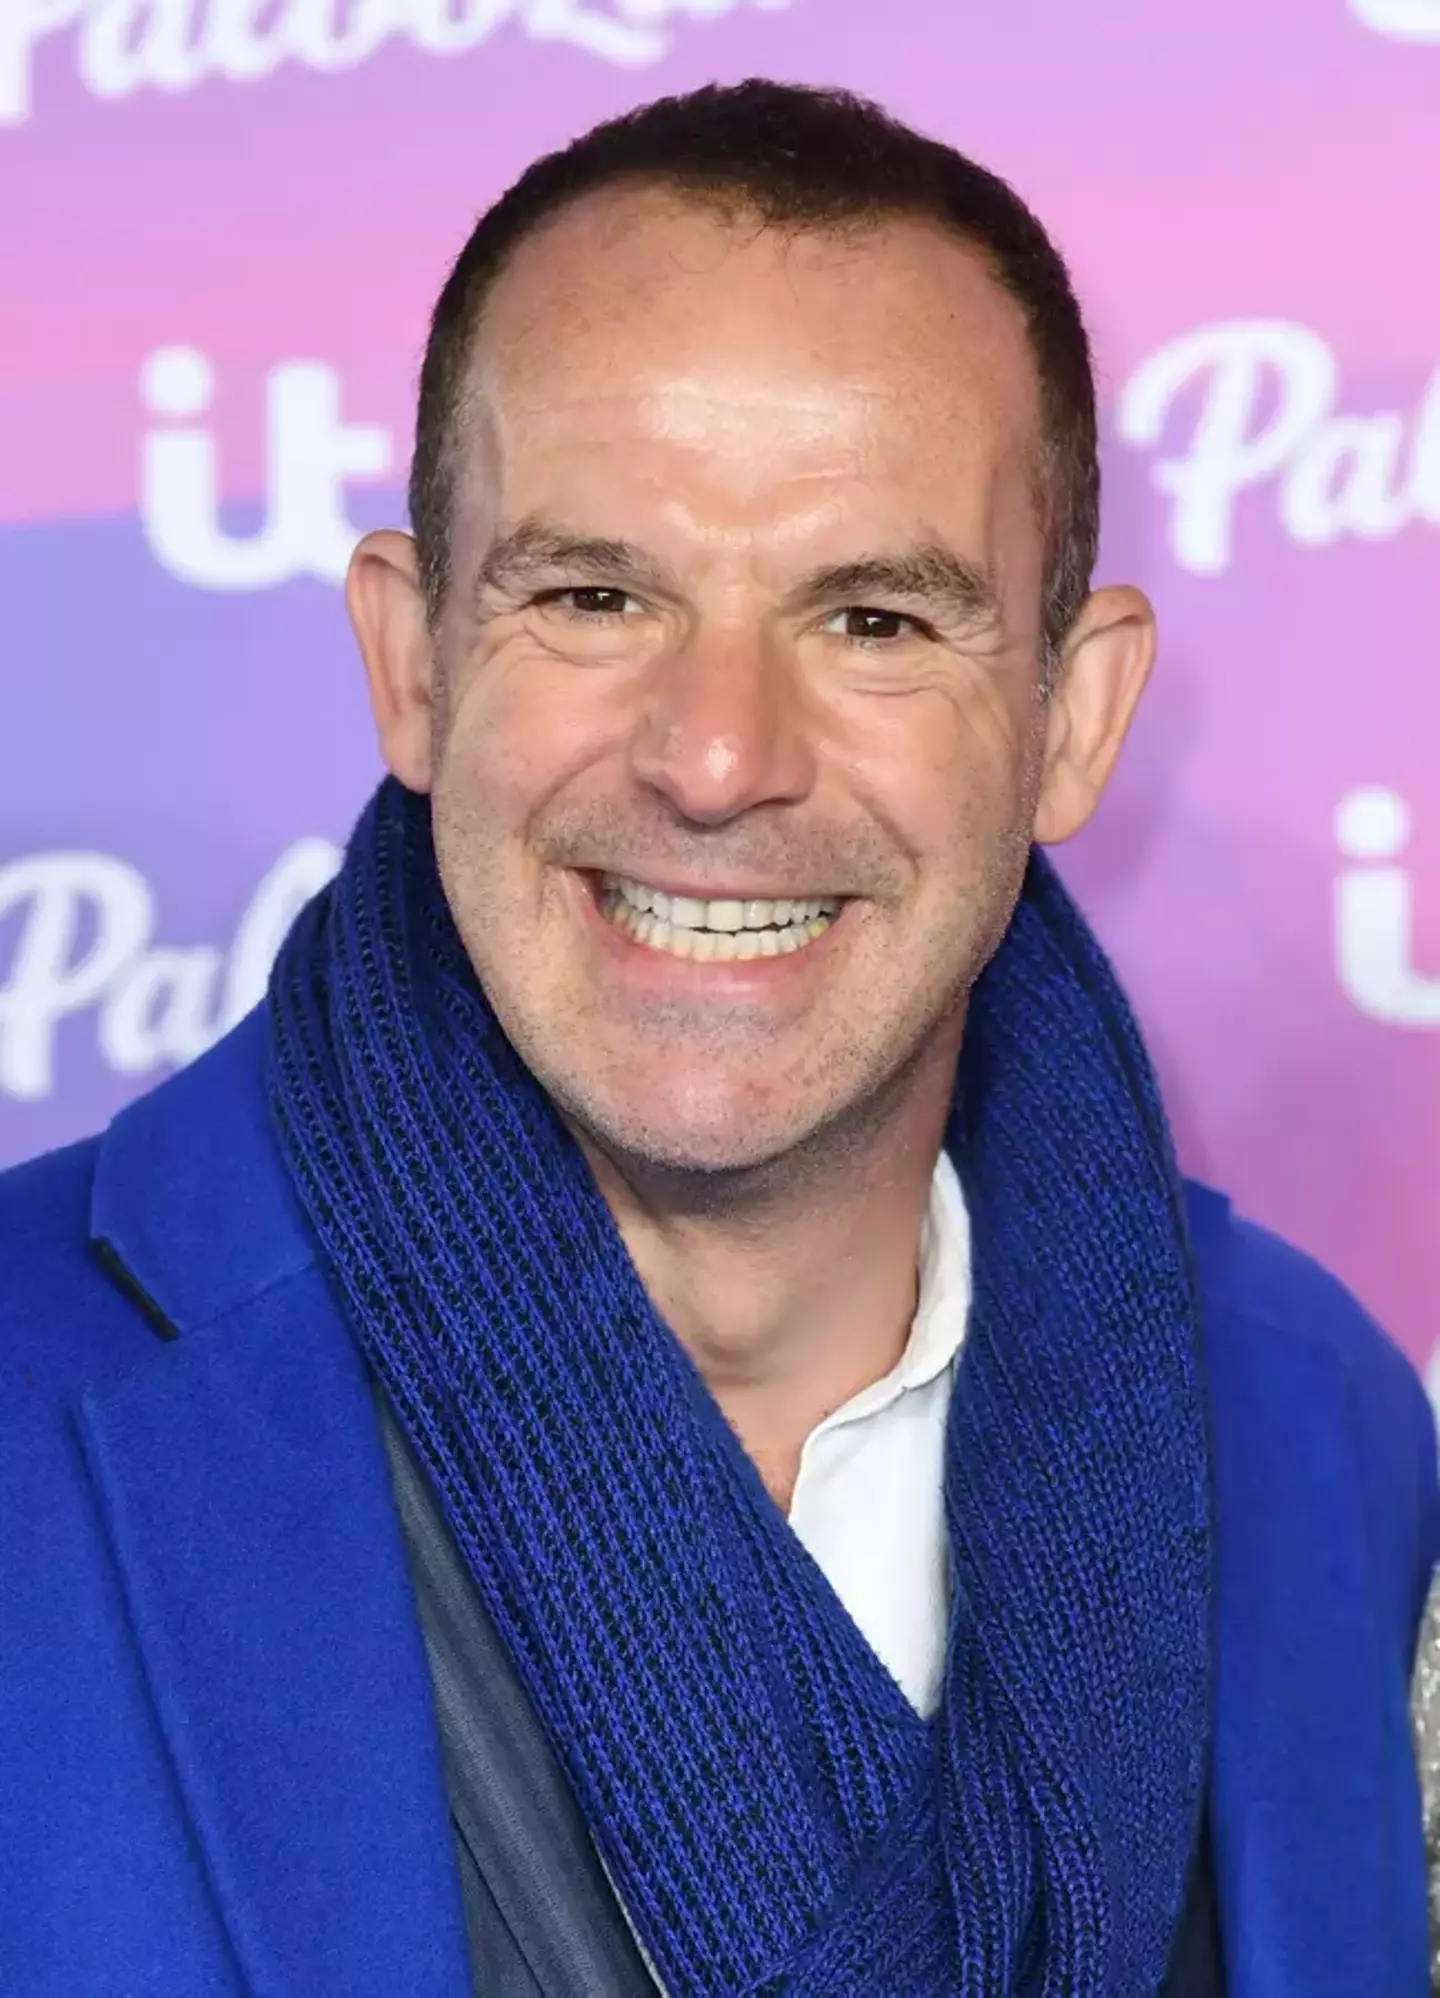 Martin Lewis clearly knows something about getting a good deal on fashion, that's a very nice scarf.